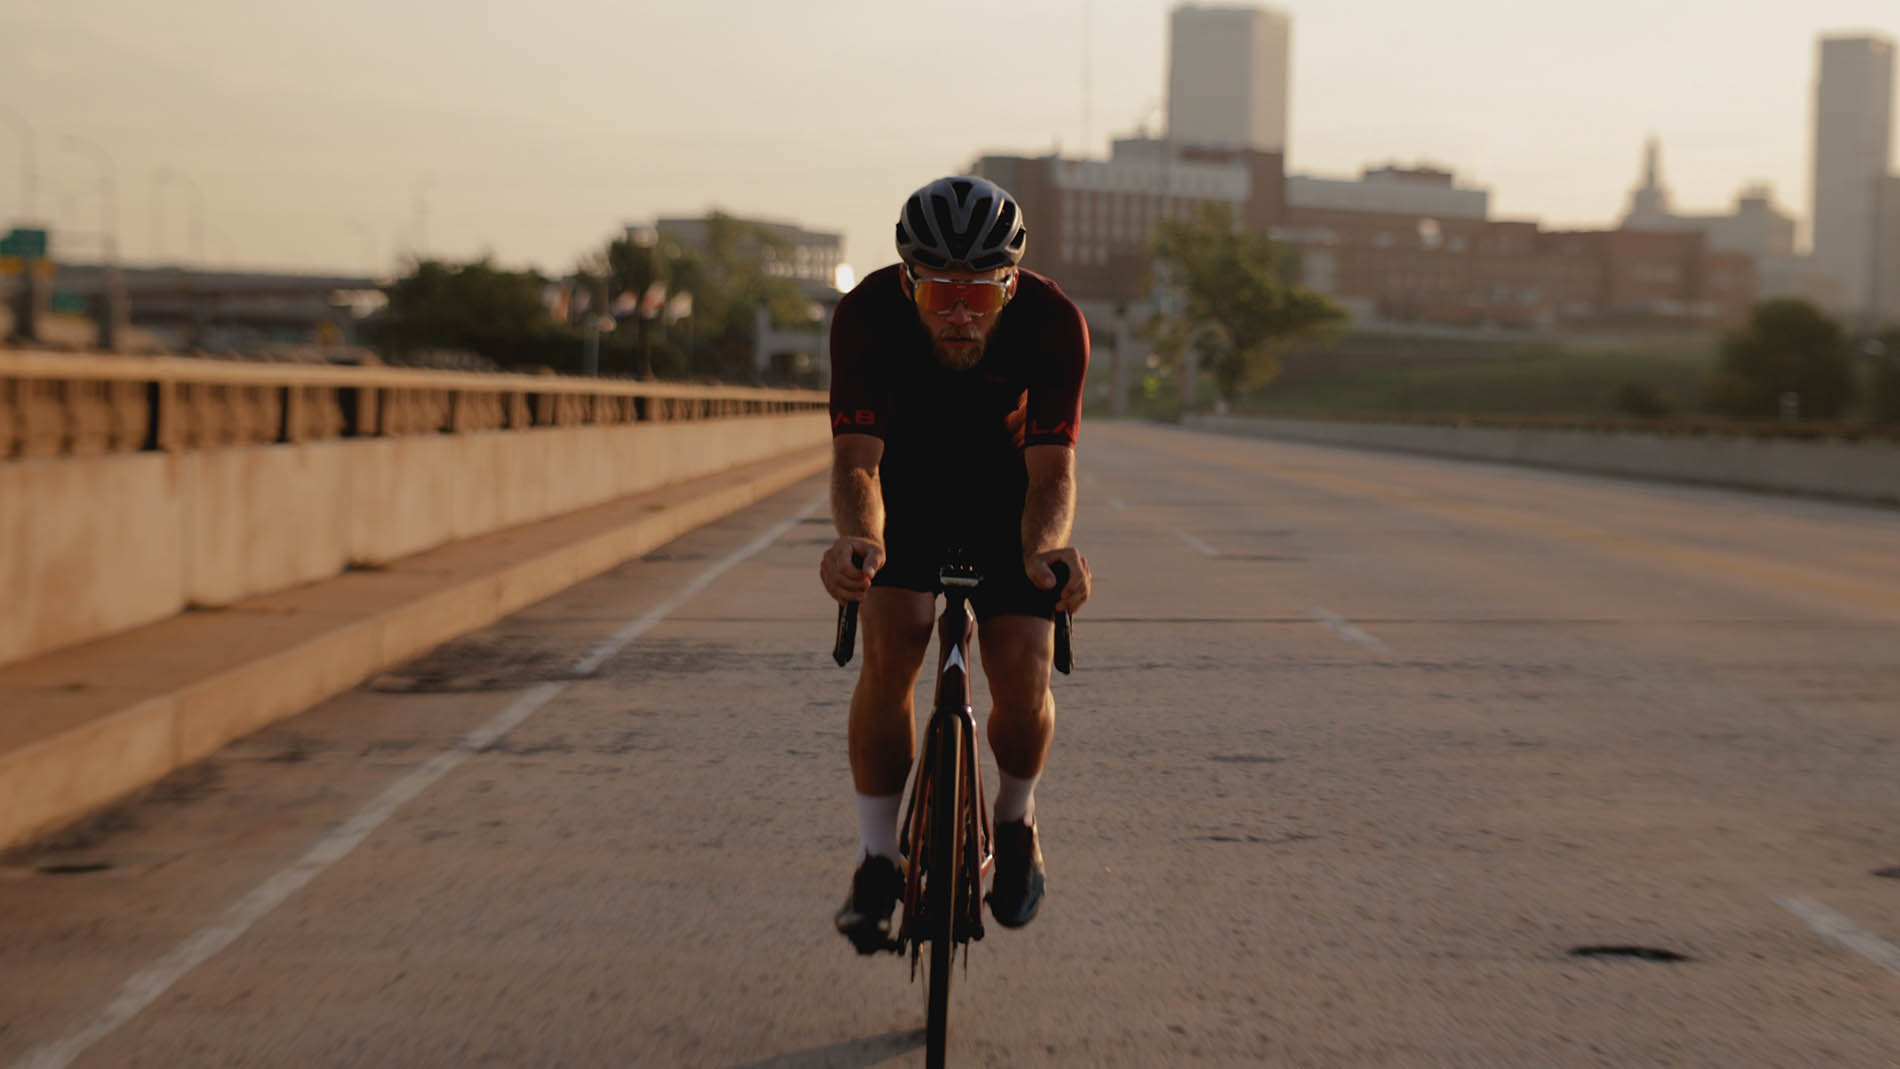 A cyclist in a black and orange outfit, possibly returning from a session focused on pelvic health physical therapy, riding towards the camera on a city bridge at sunset, with skyscrapers in the soft-focus